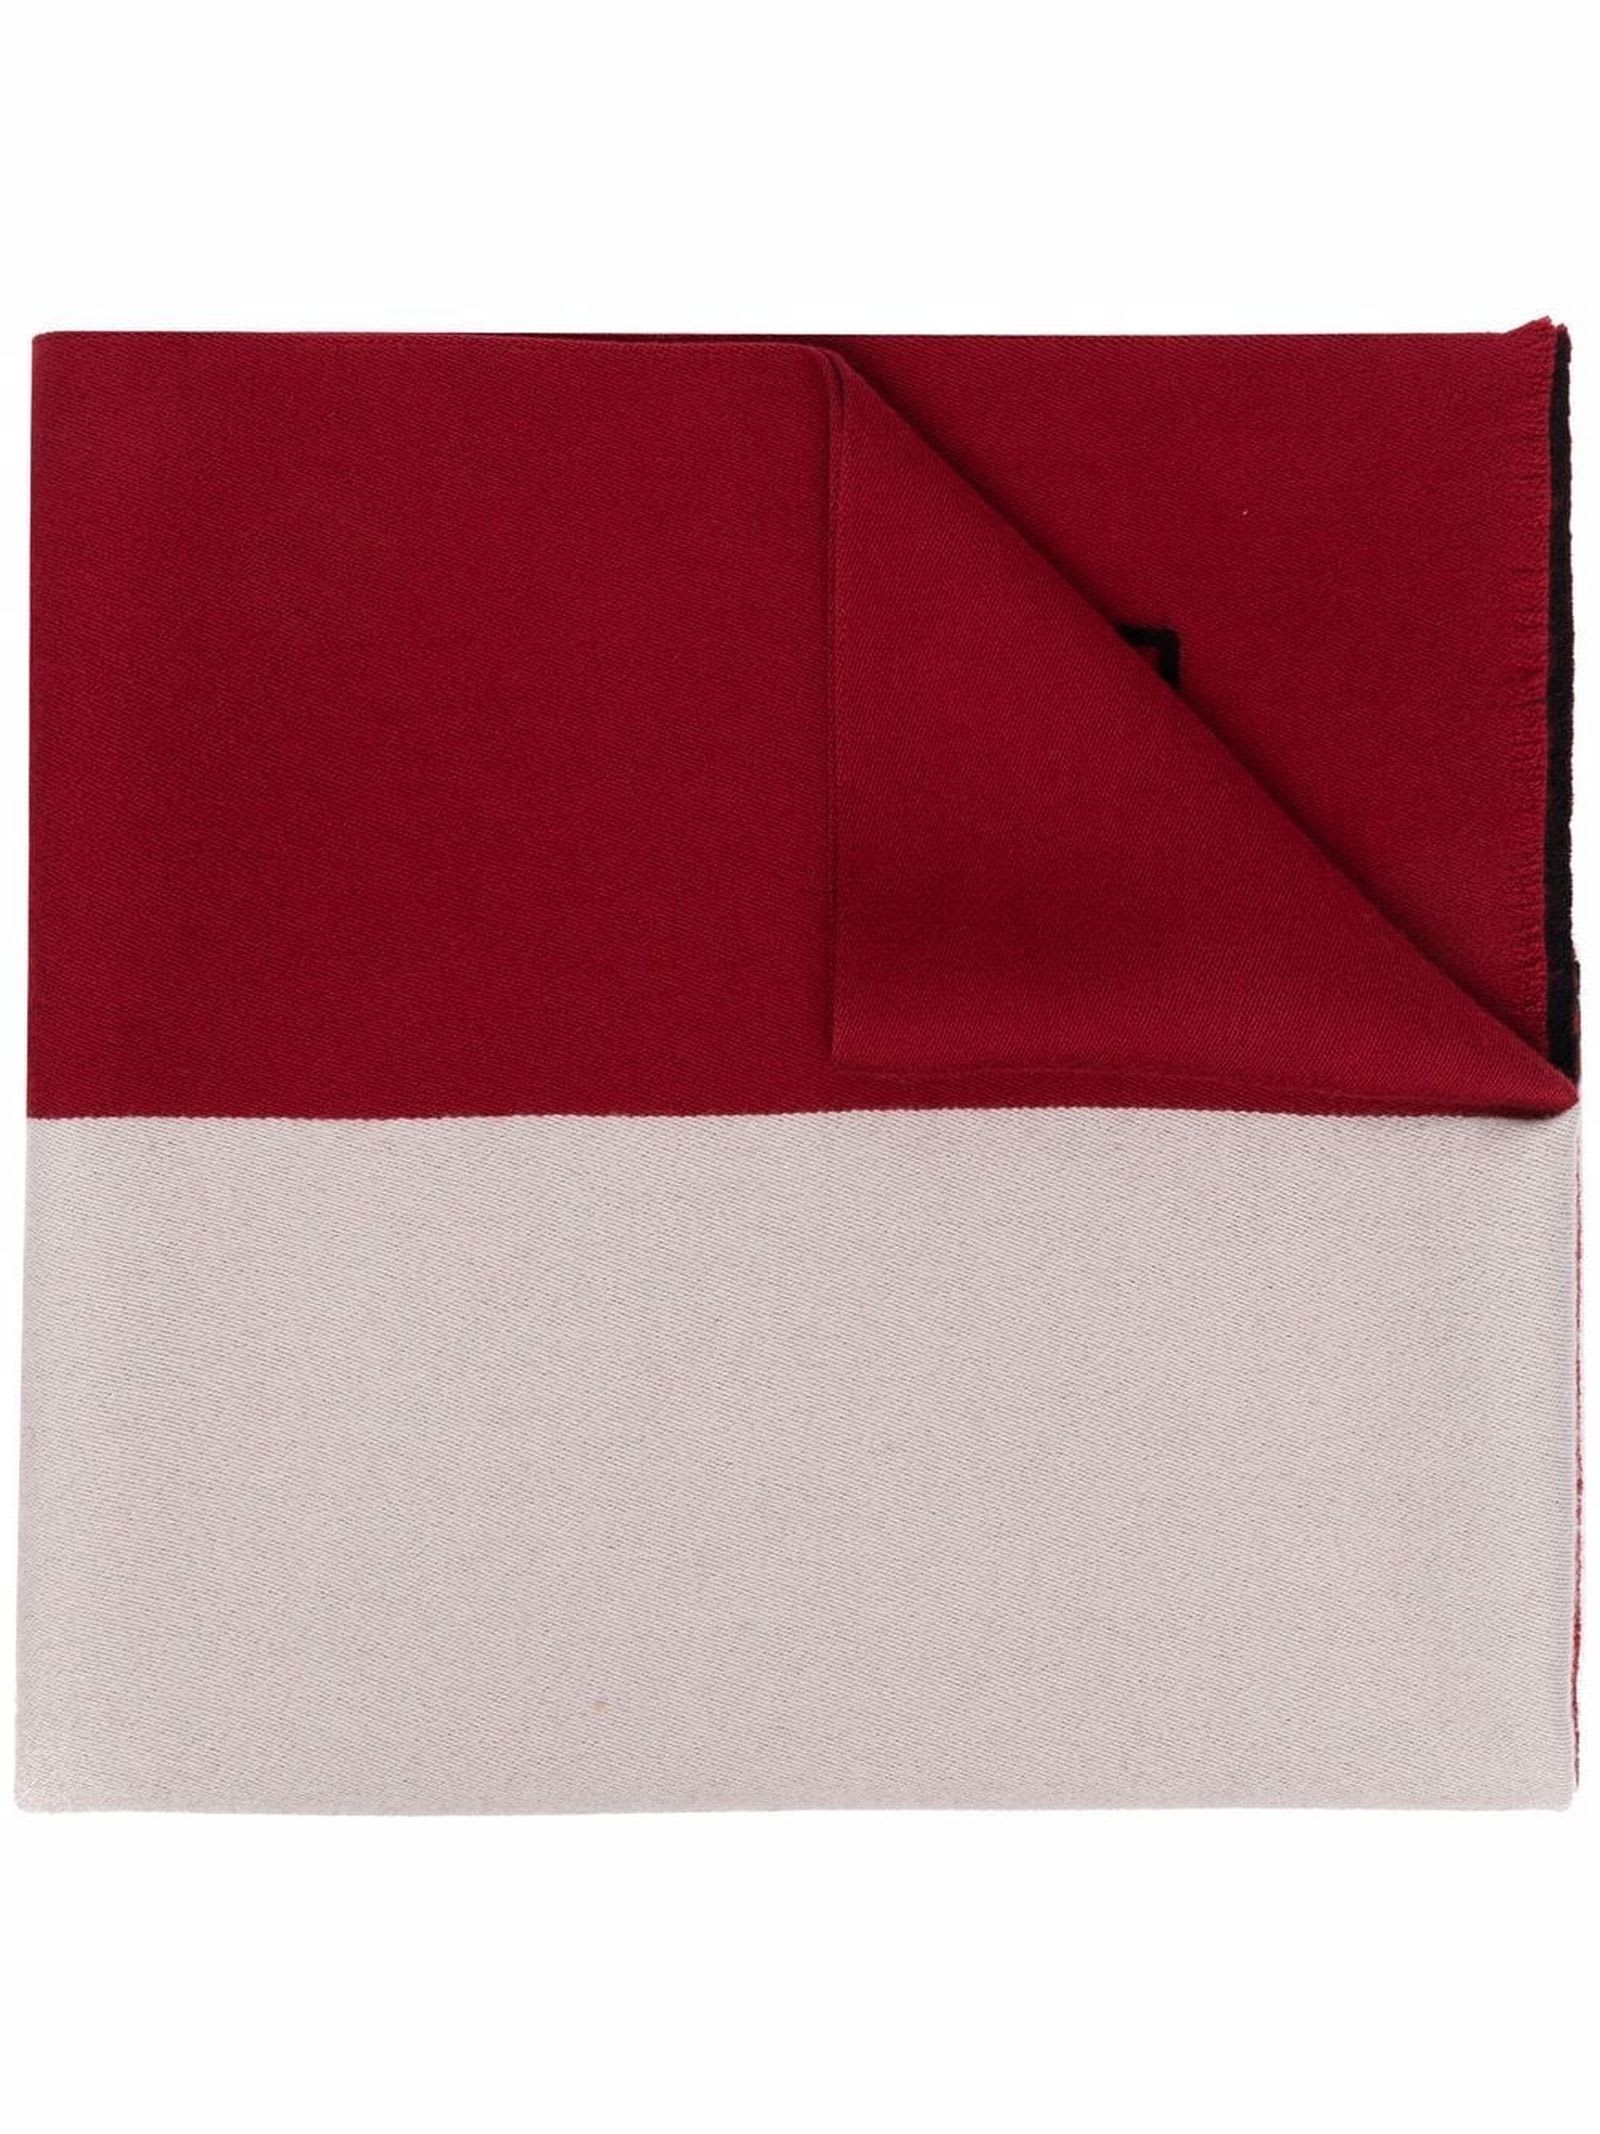 Etro Red And White Wool Scarf